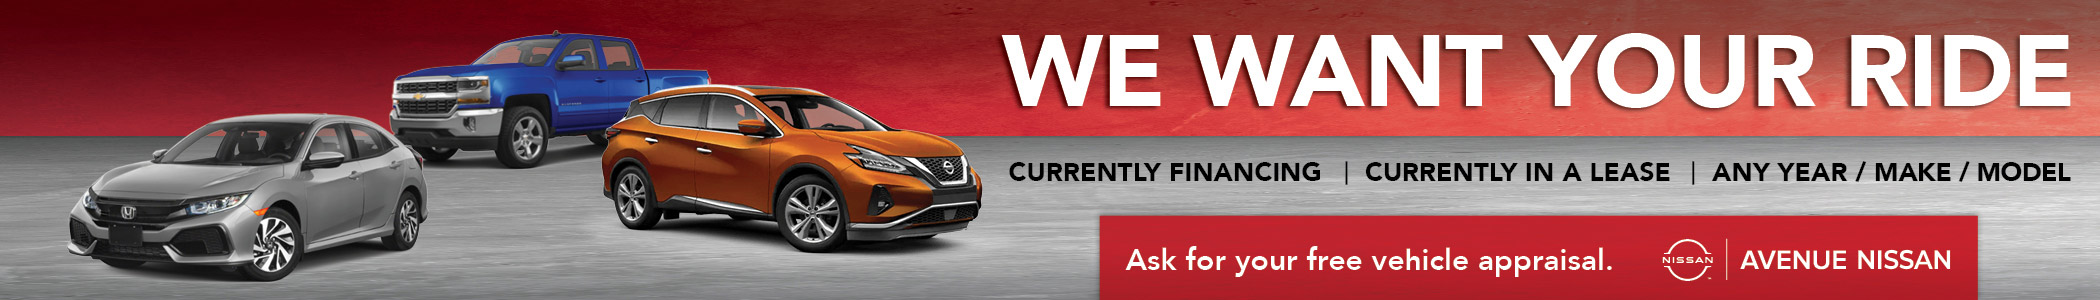 We Want Your Ride at Avenue Nissan